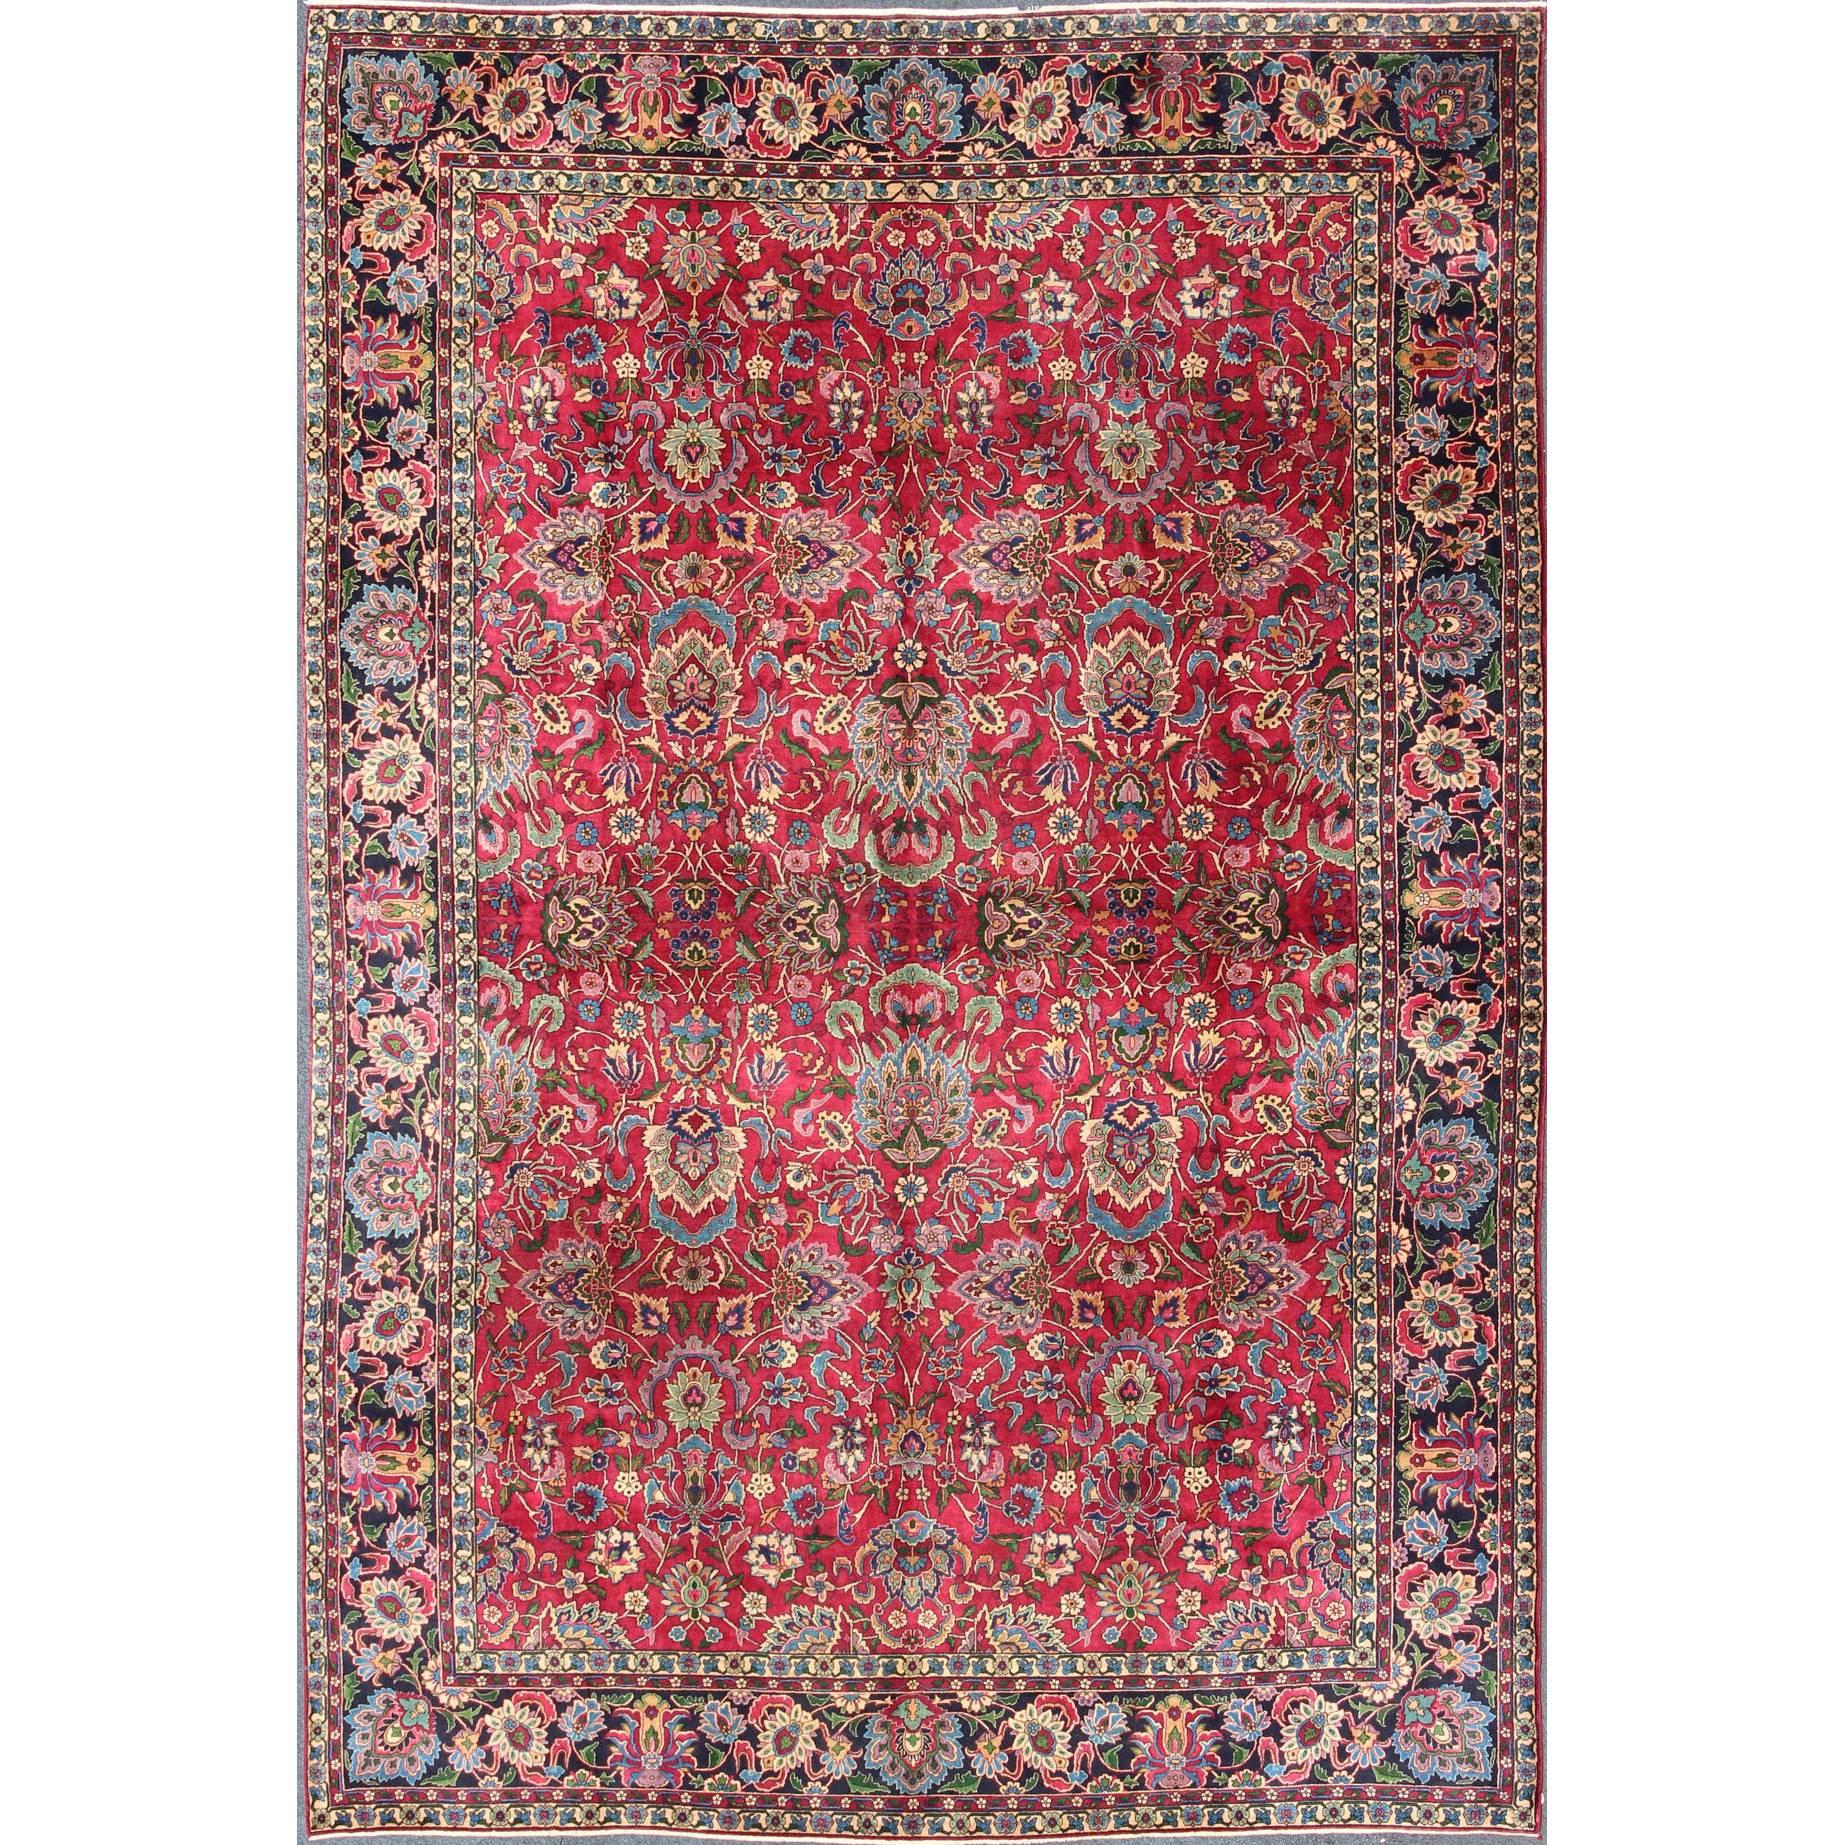 Antique Indian Agra Carpet with Raspberry Color and Fine Shinny Wool For Sale